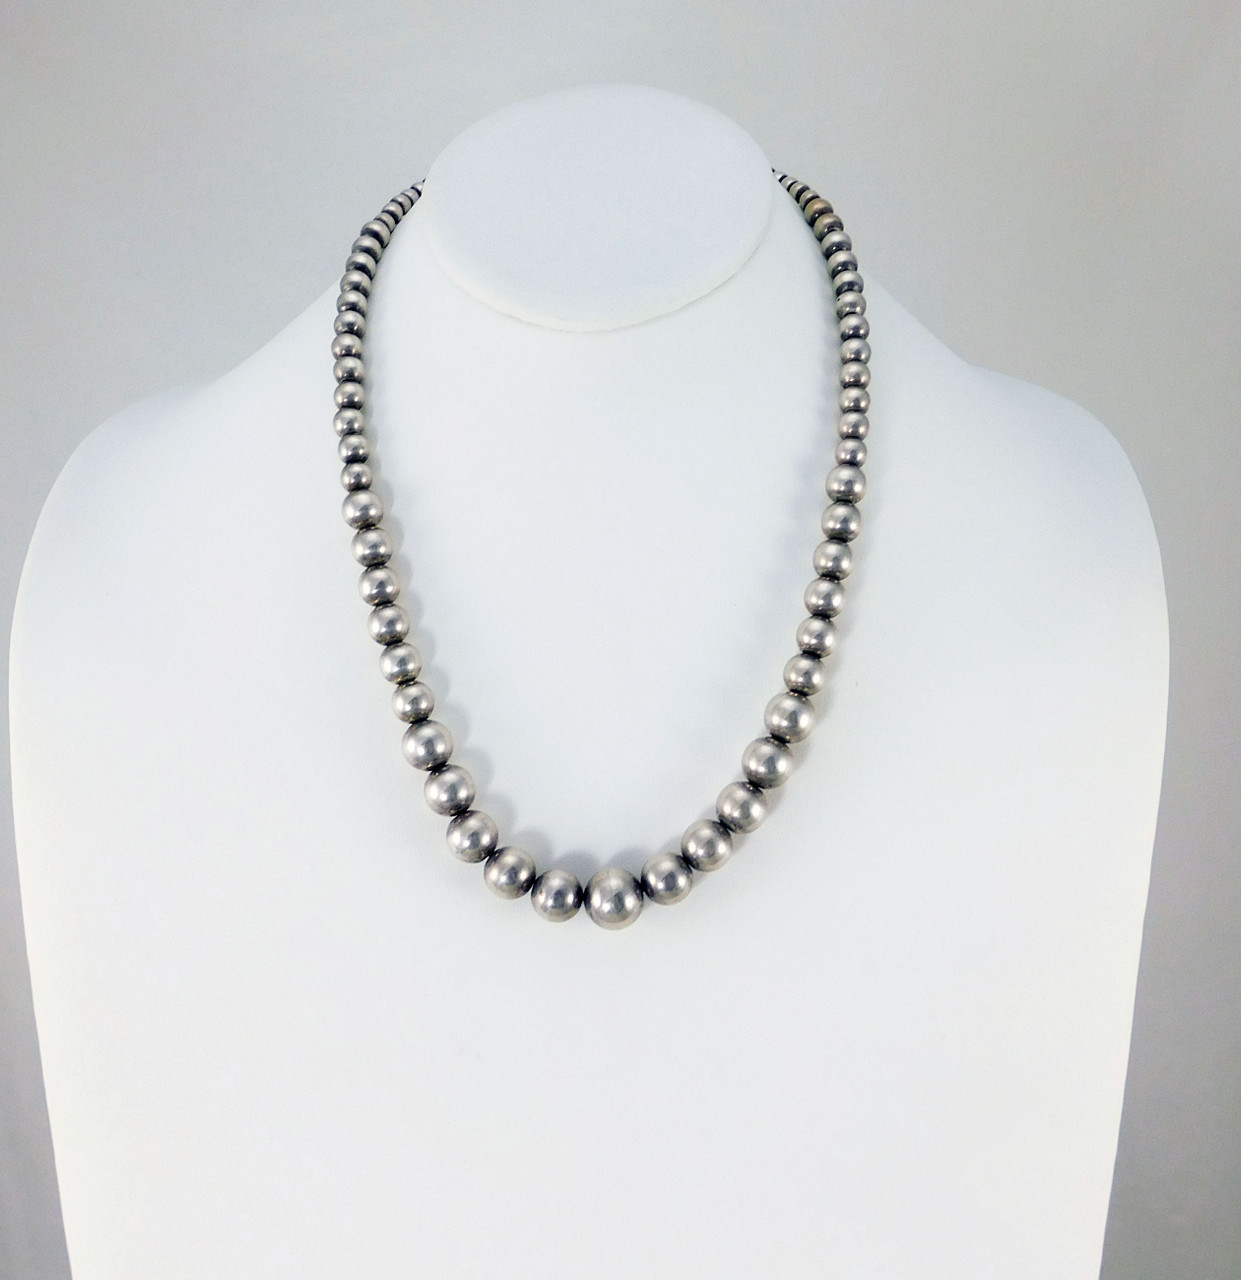 Silver Graduated Bead Necklace